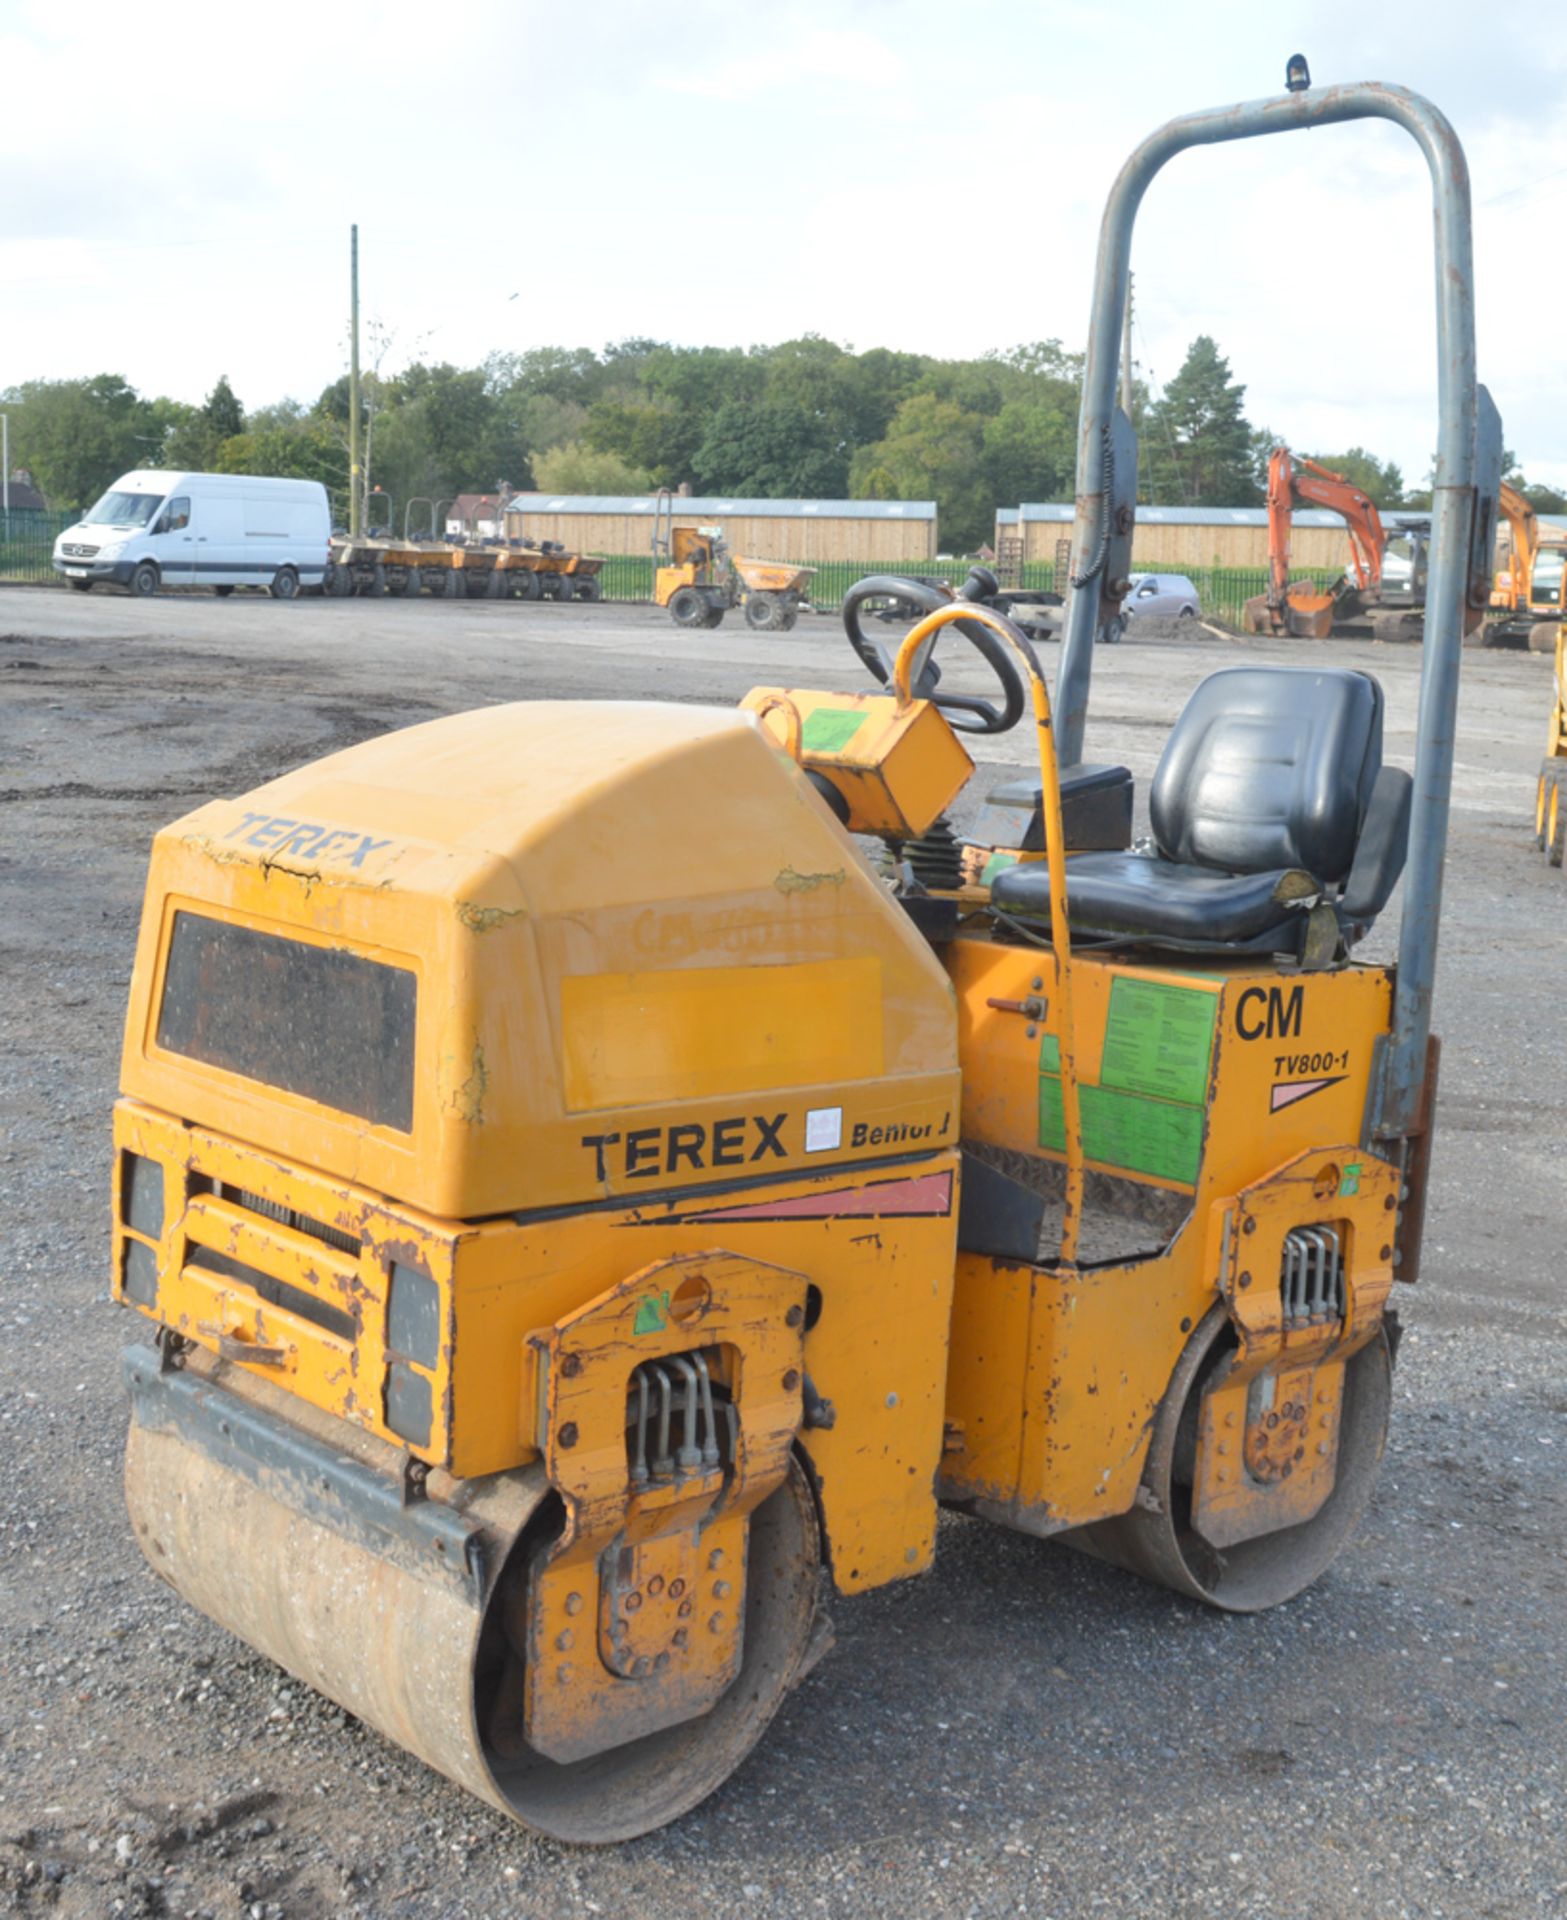 Benford Terex TV800-1 double drum ride on roller Year: 2005 S/N: E501HU008 Recorded Hours: 1470